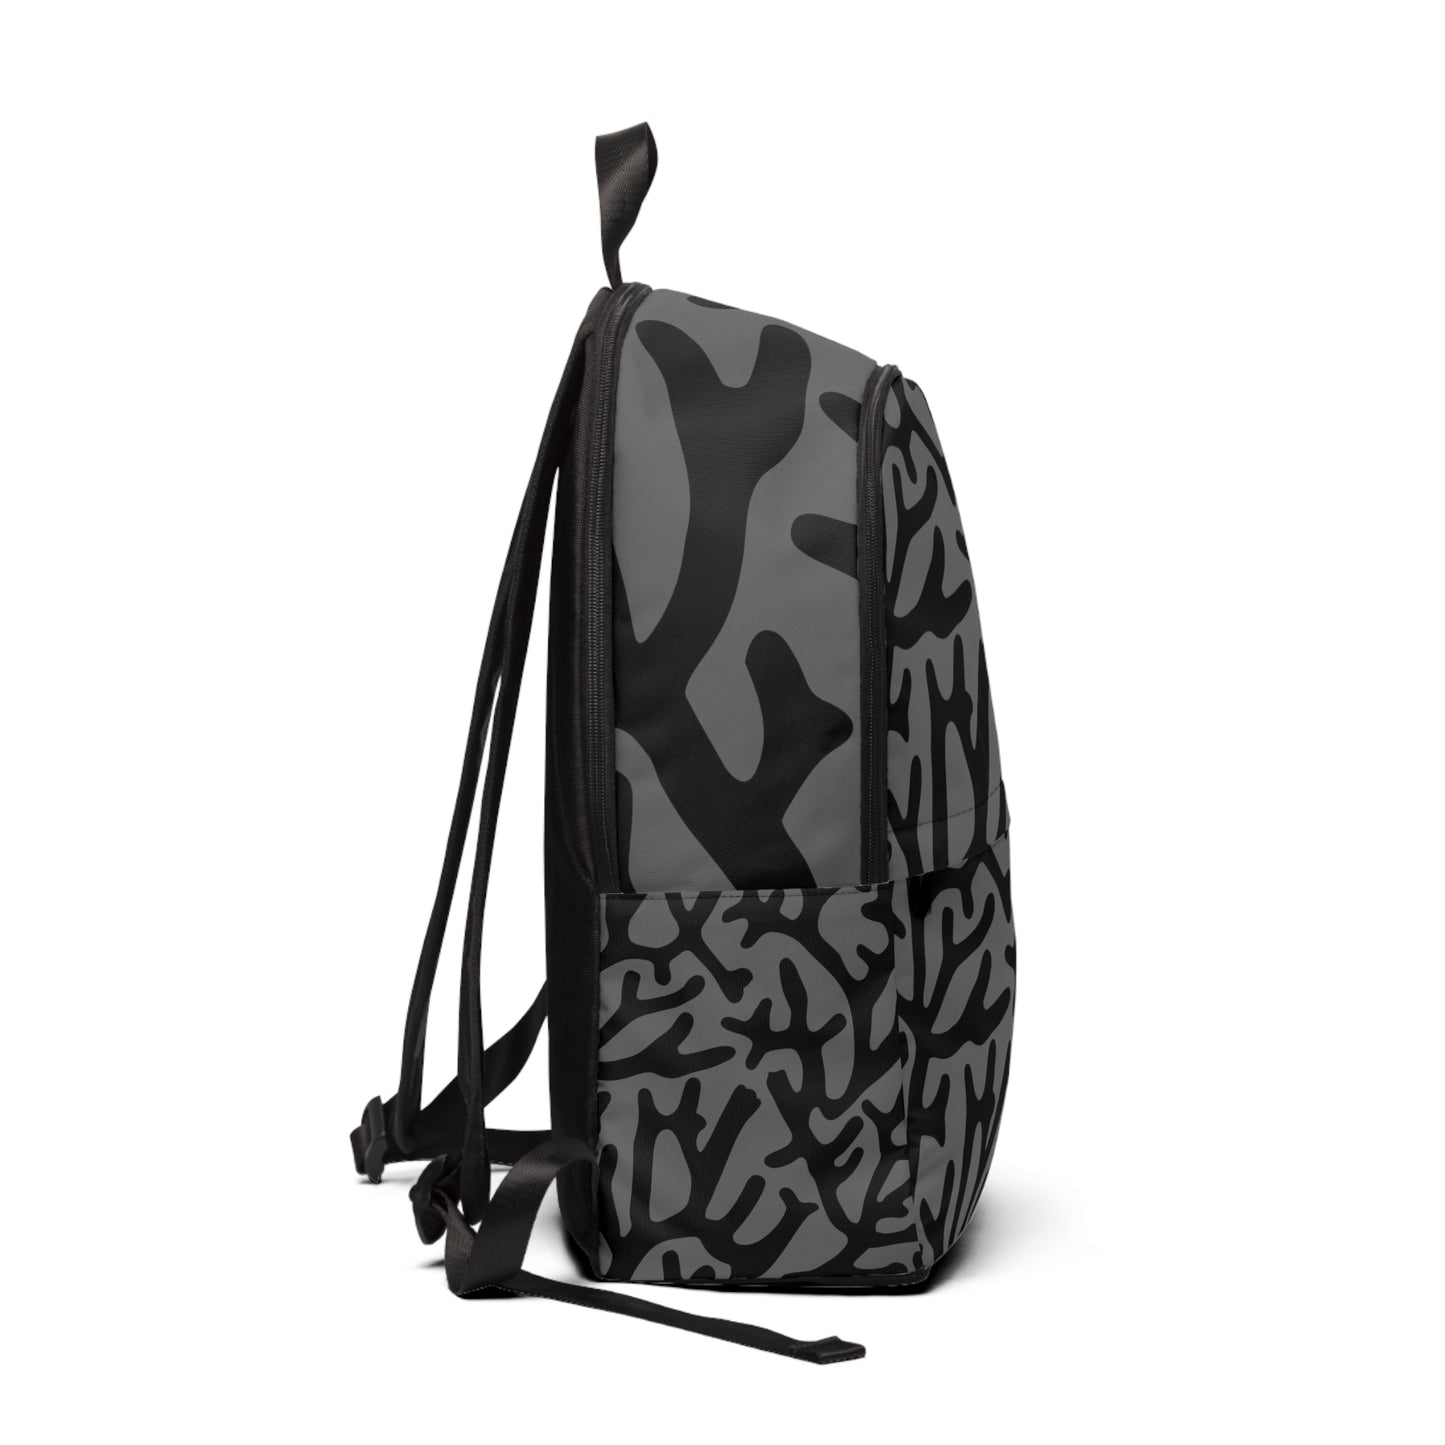 Vampire Art Grunge Goth Emo Black and Charcoal Coral Reef Unisex Fabric Backpack